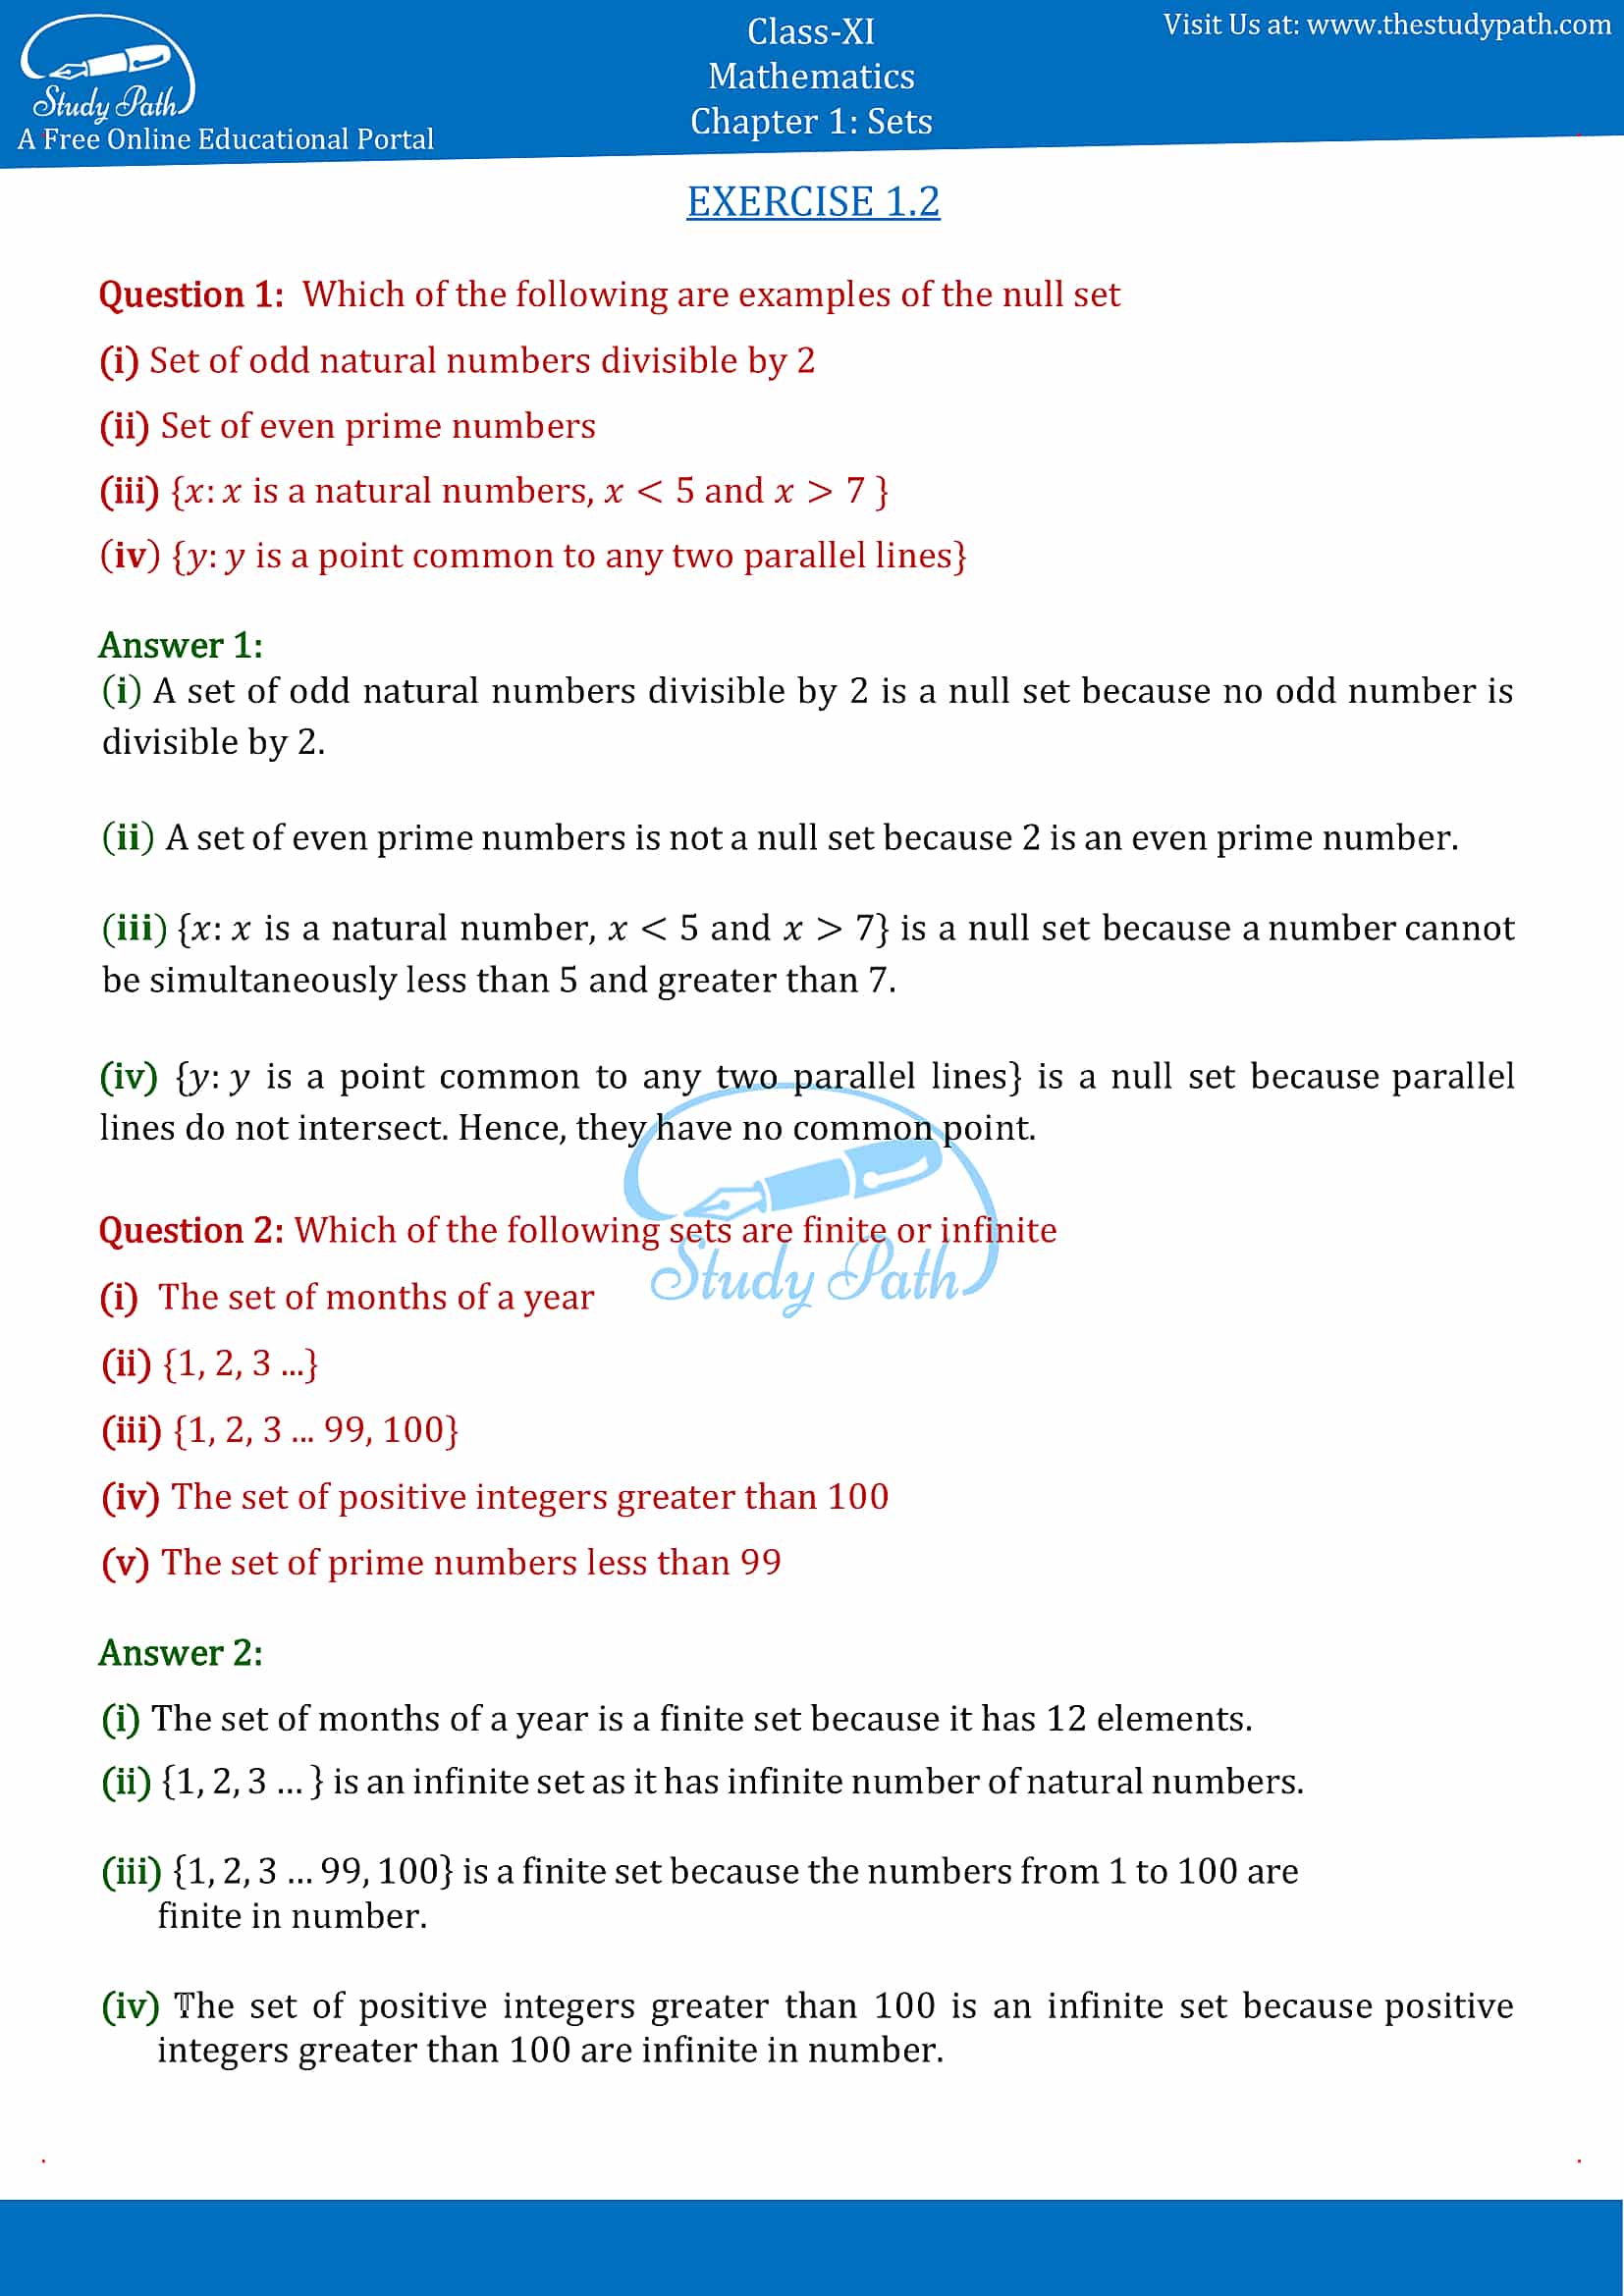 NCERT Solutions for Class 11 Maths chapter 1 sets Exercise 1.2